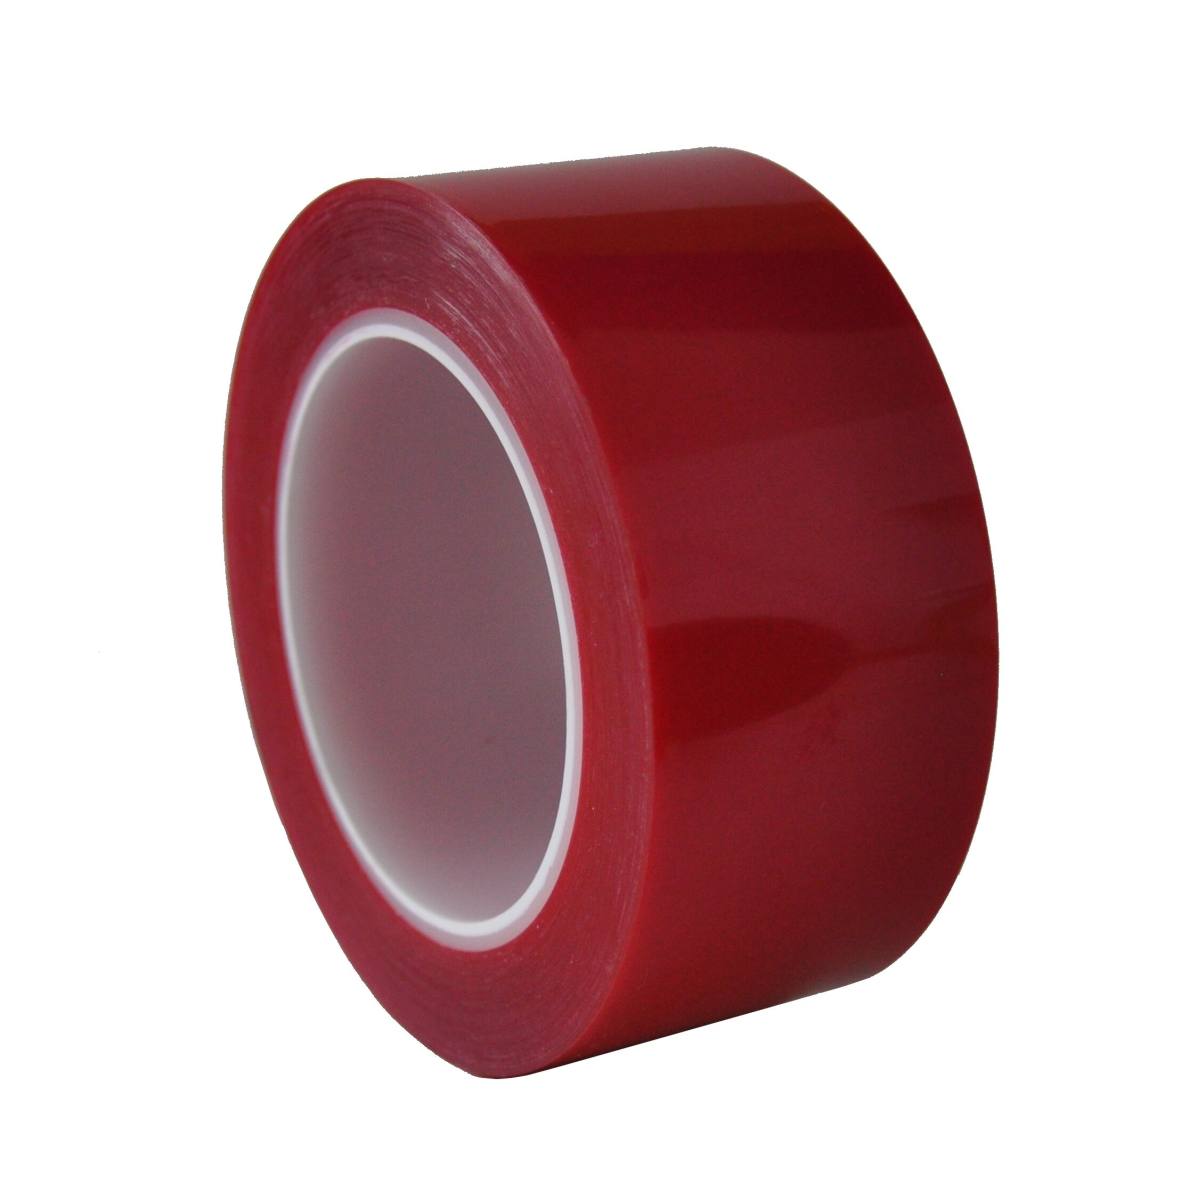 S-K-S 208R polyester adhesive tape, 50mmx66m, red